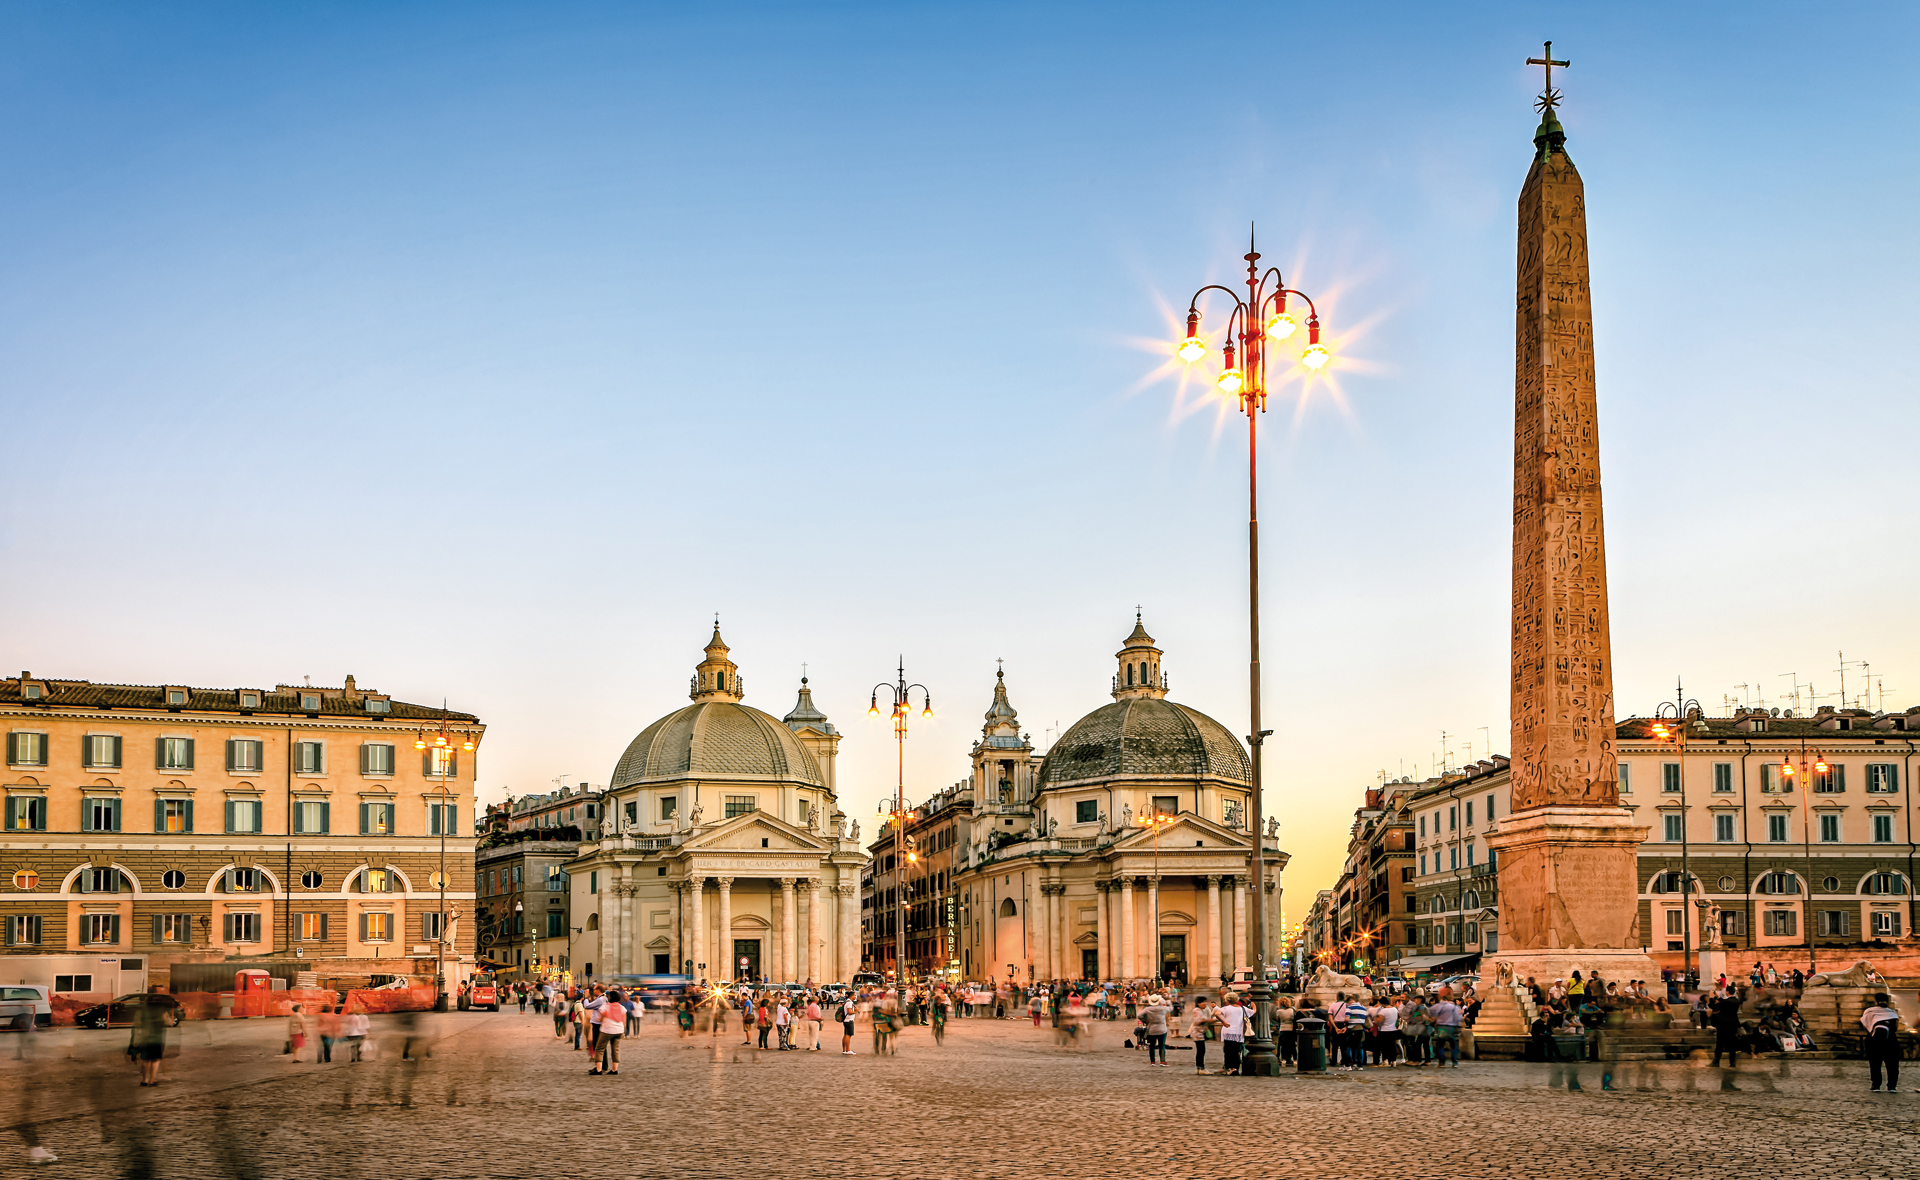 Rome piazza del Popolo with the flaminio obelsico in the foreground and the santa Maria churches in the background